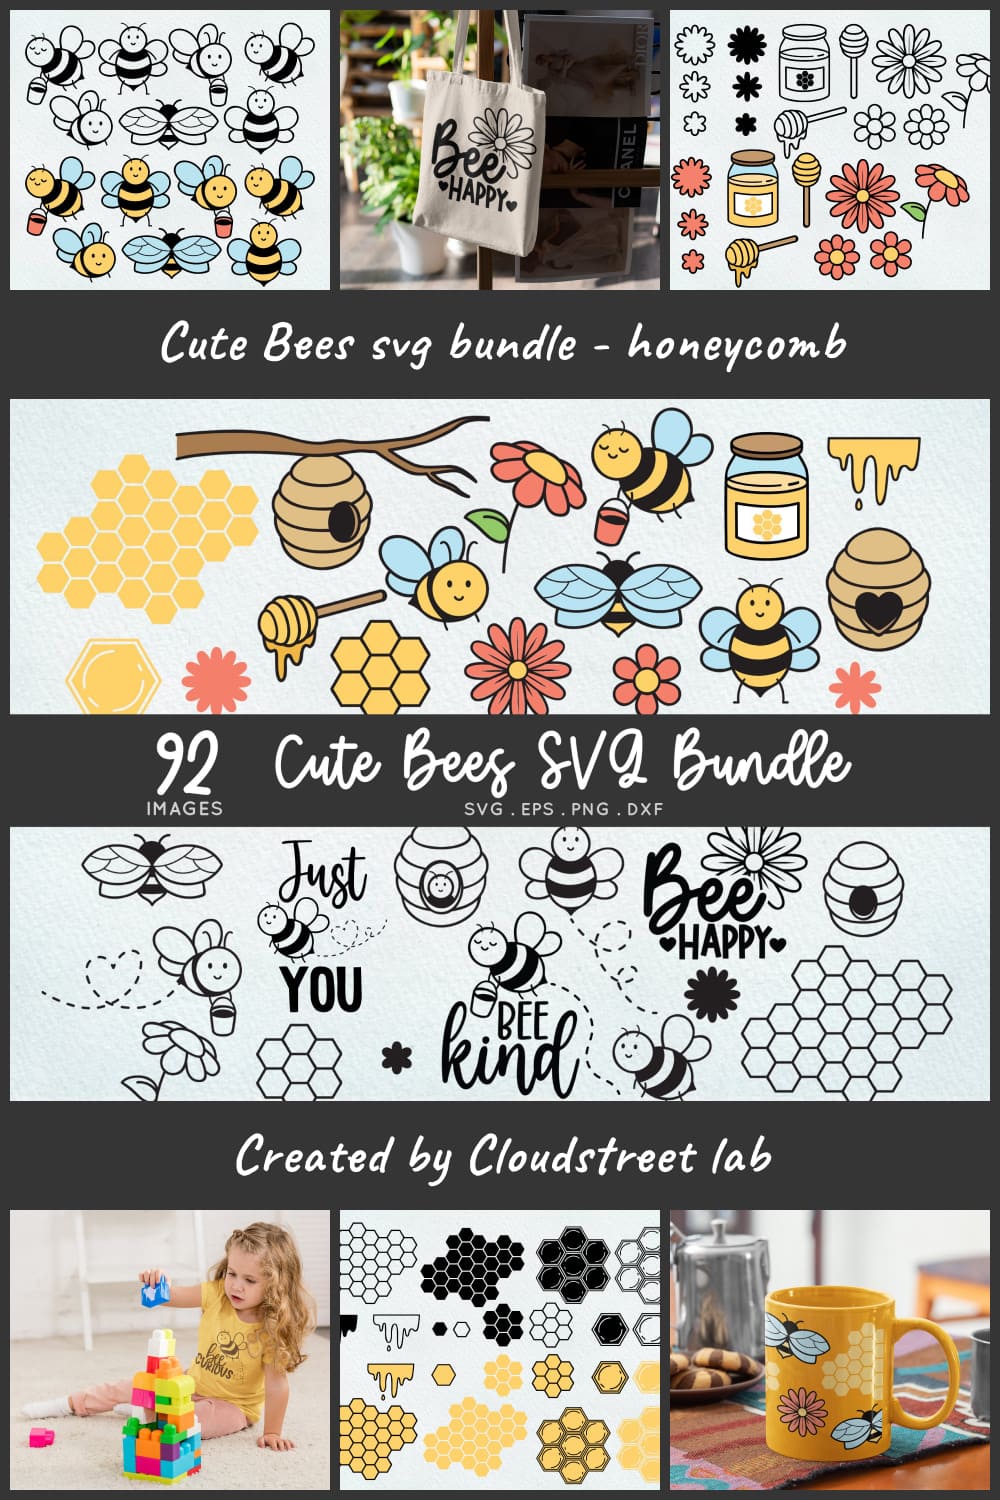 Cute Bees SVG Bundle preview of Pinterest image.